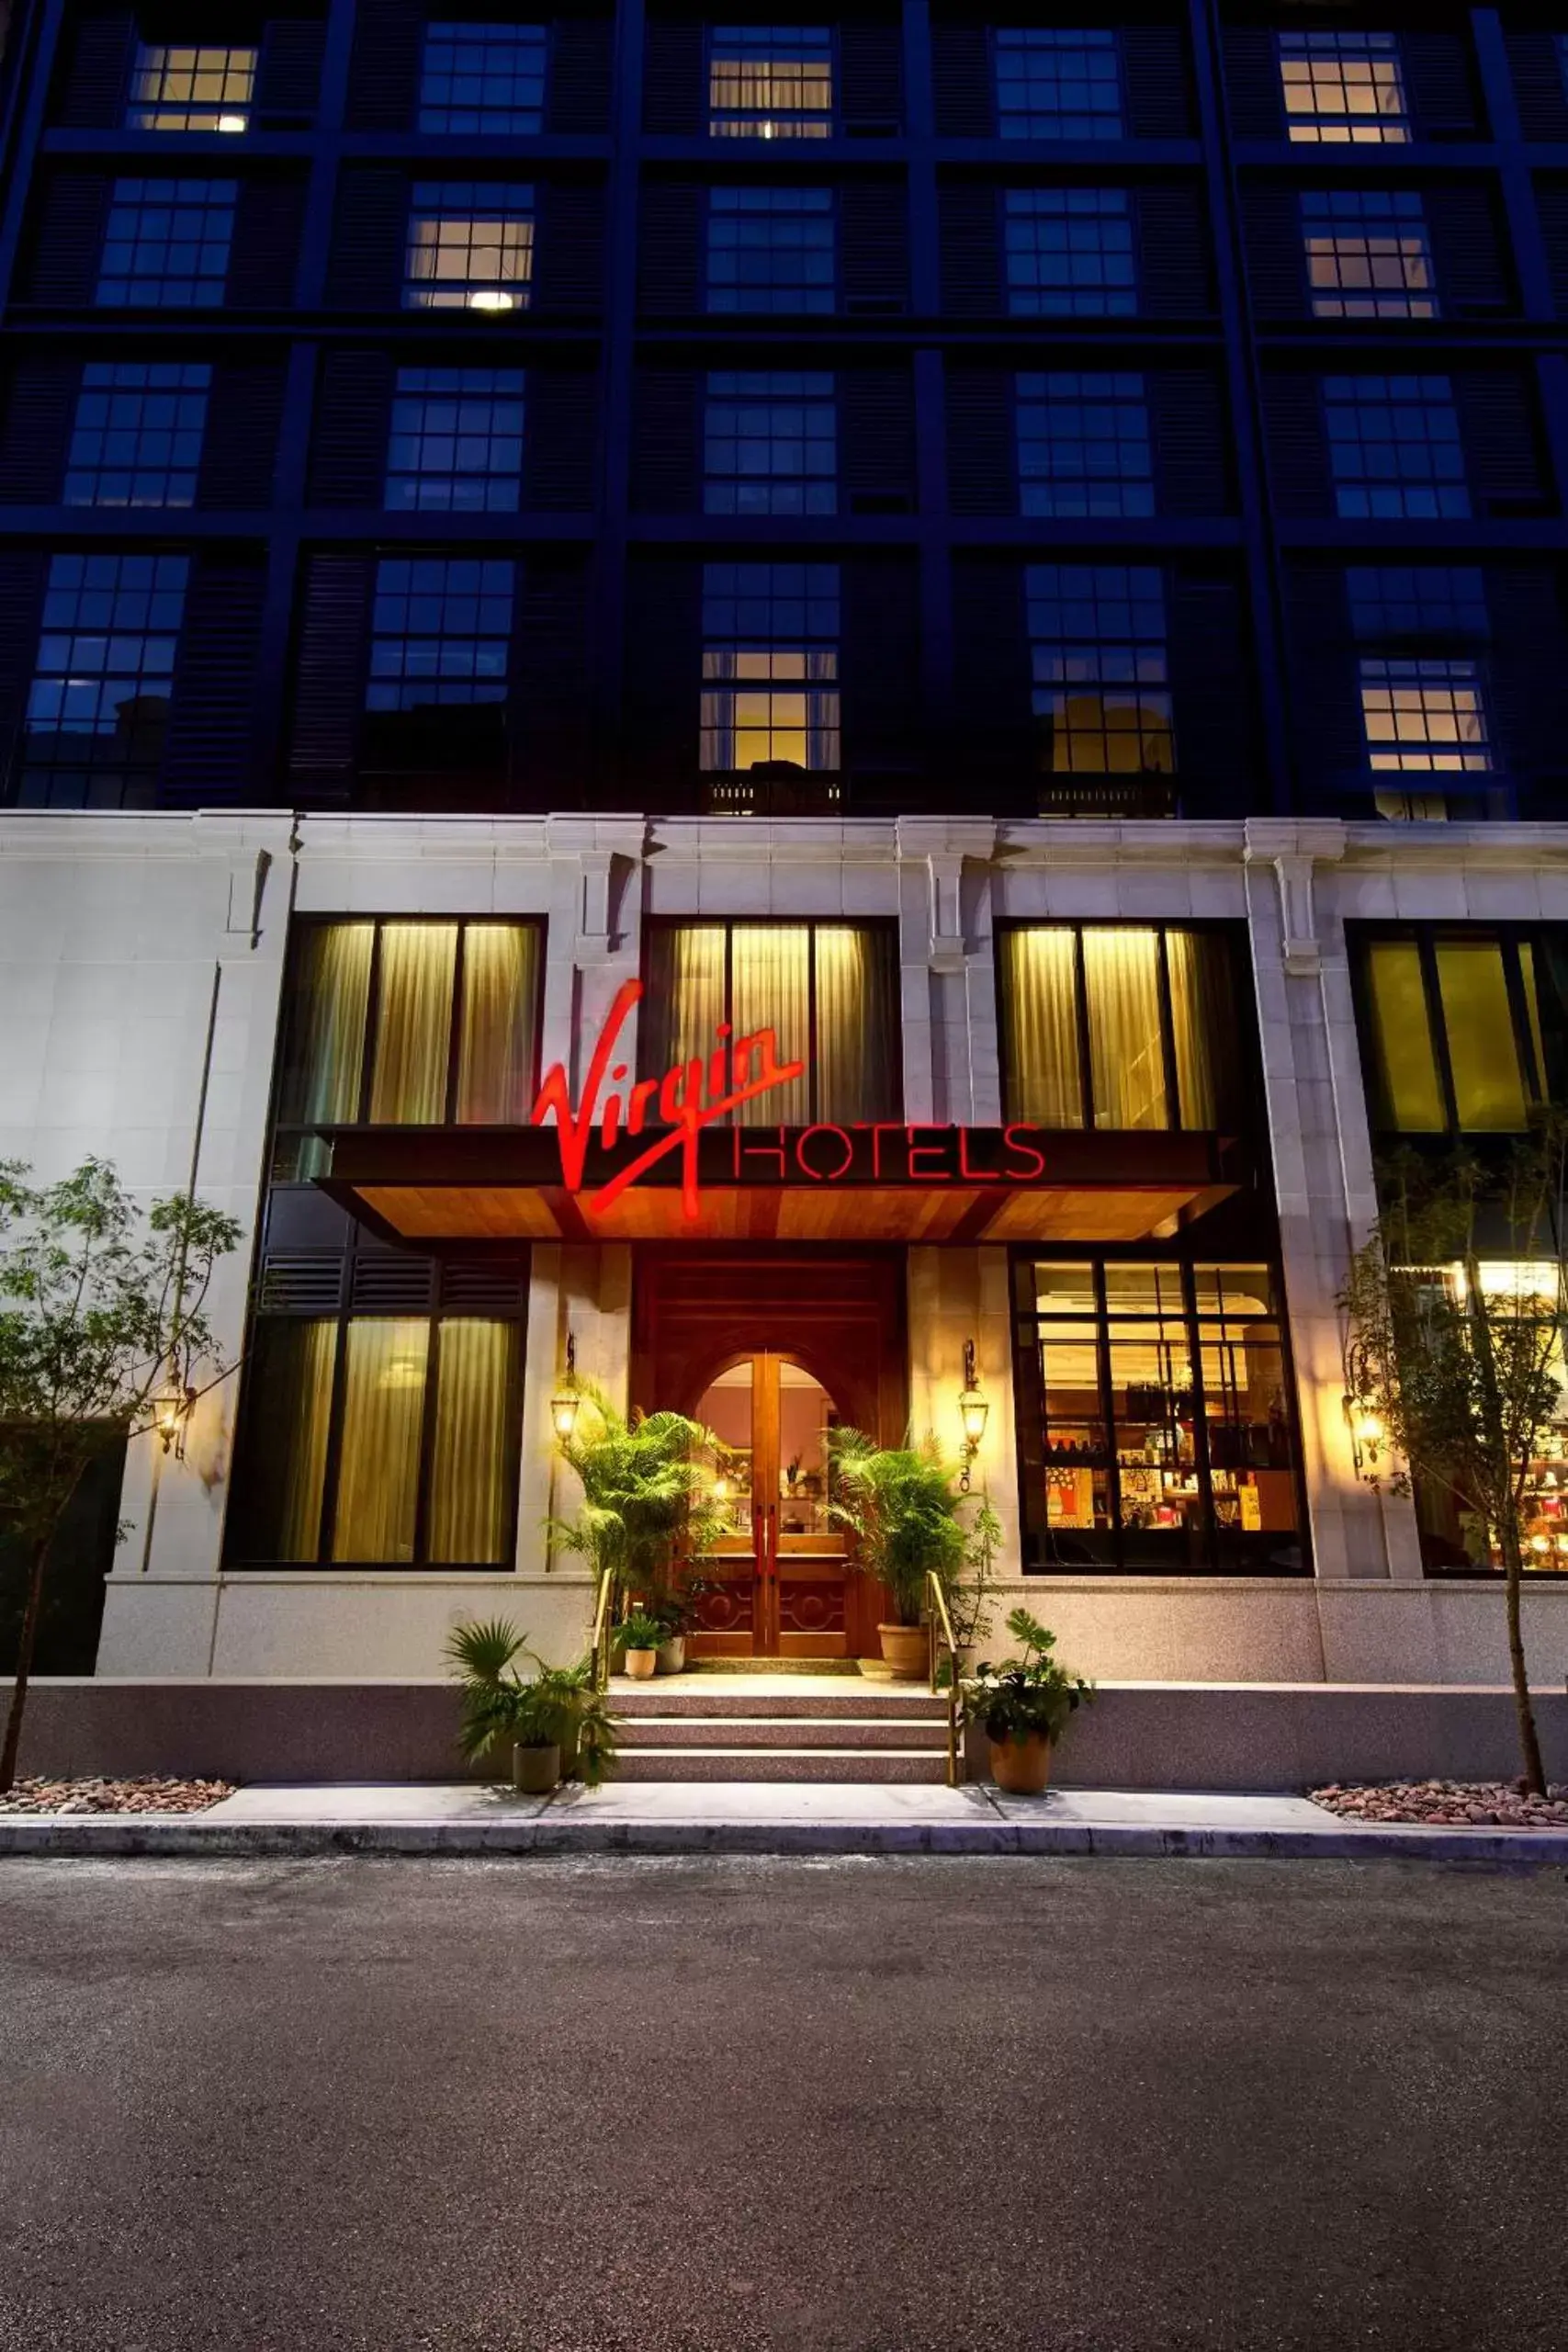 Property Building in Virgin Hotels New Orleans